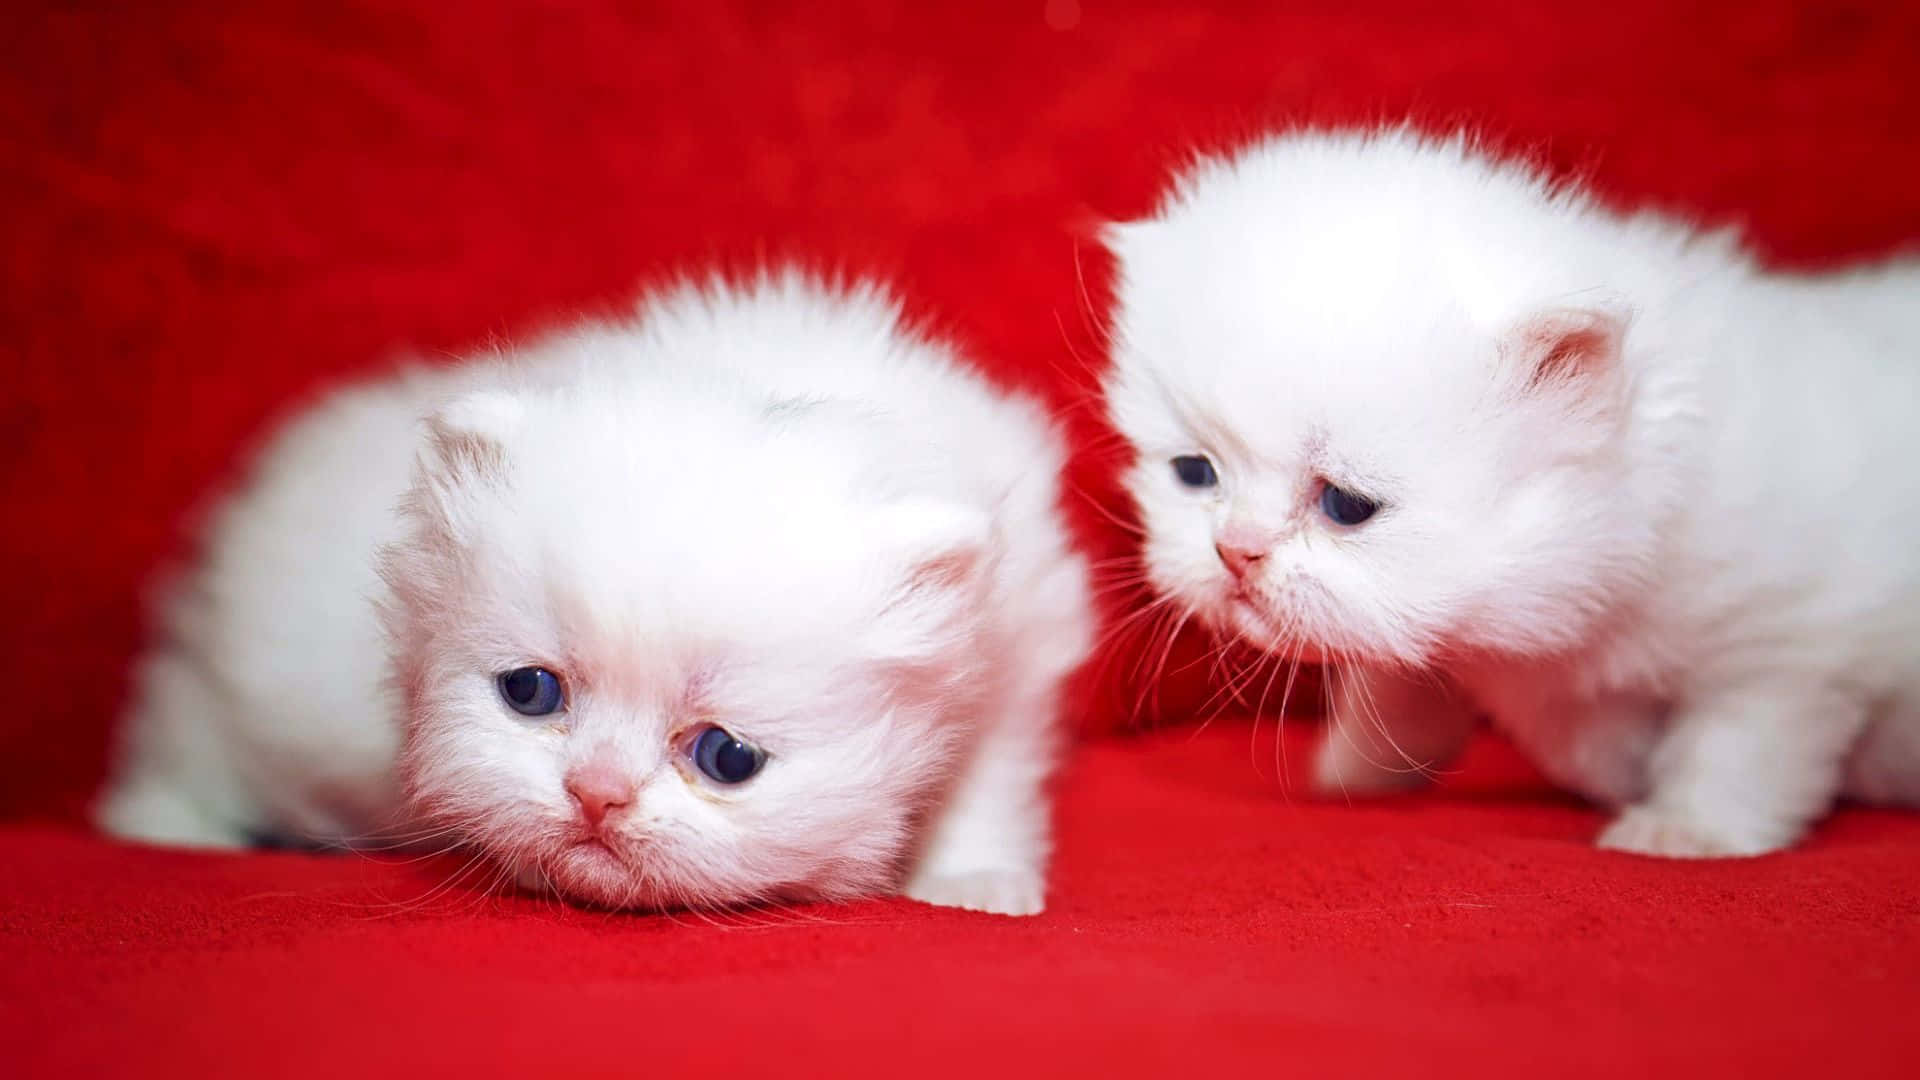 Newborn Cute Kittens On Red Couch Wallpaper